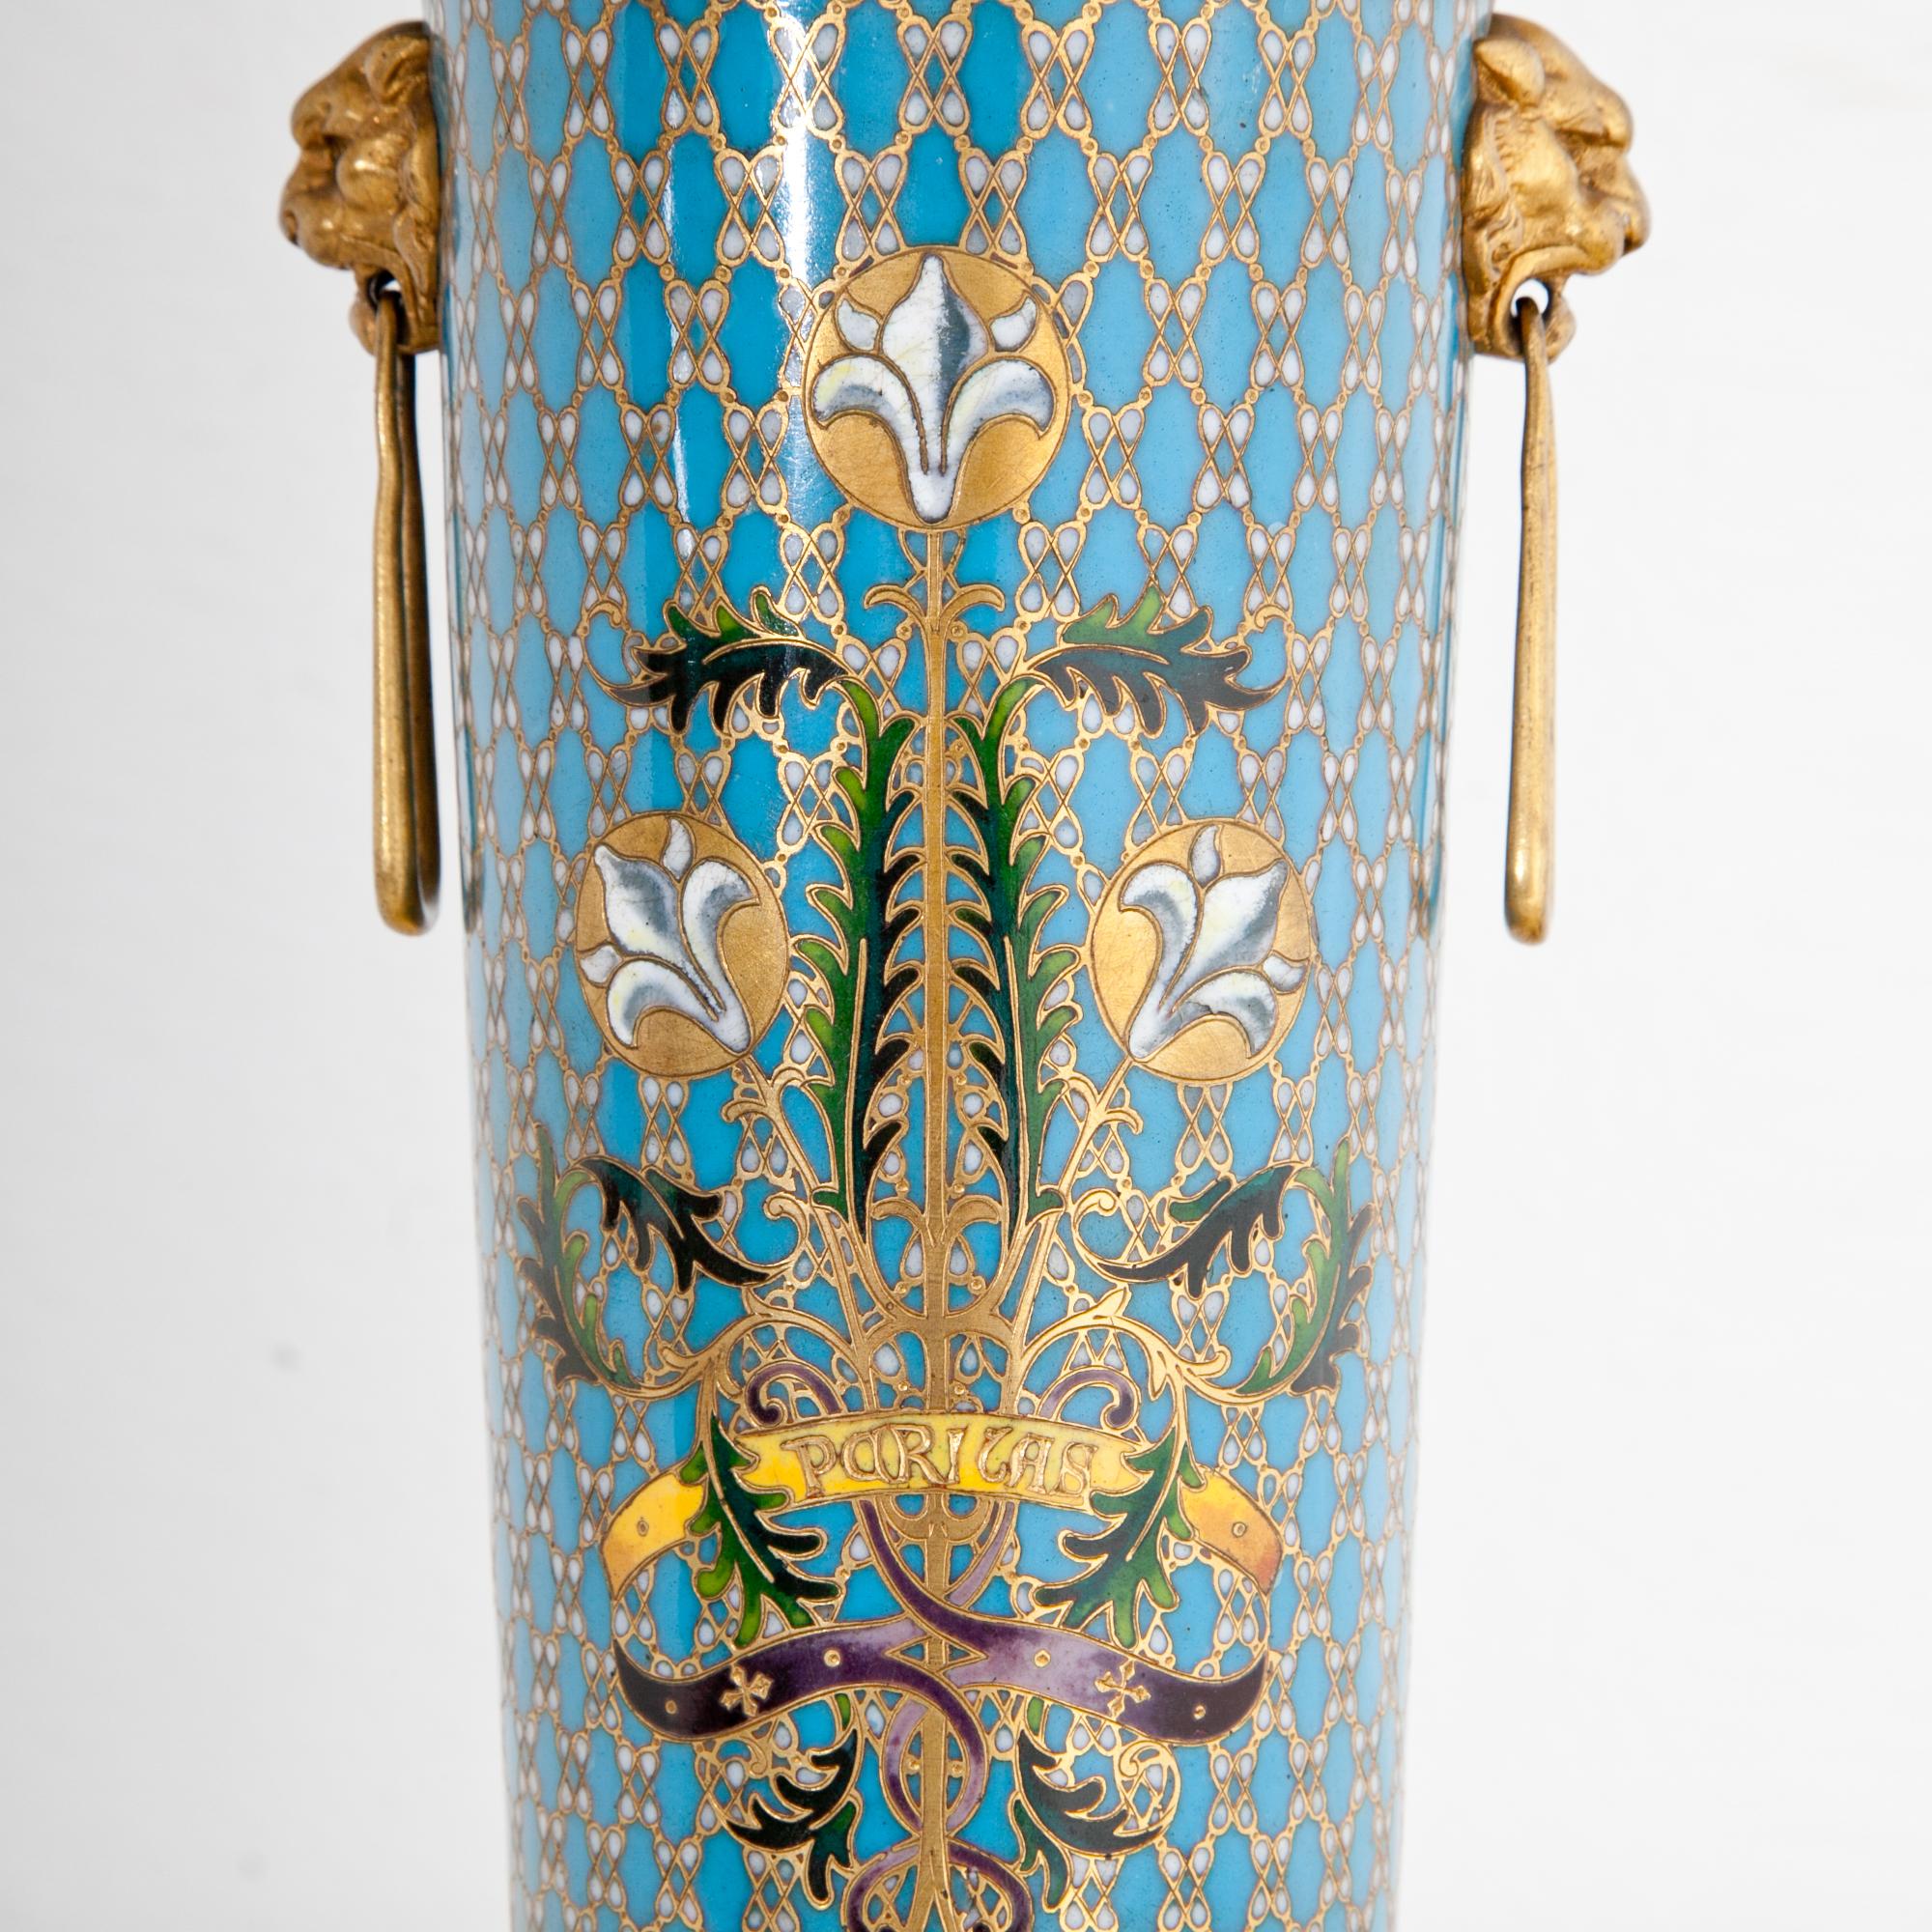 Cloisonné Vase signed Barbedienne of the second half of the 19th century. The tulip shaped body stands on four legs and has lateral lion head handles. The cloisonné work shows white lilies on a blue ground with a golden rhomboid net pattern. Signed